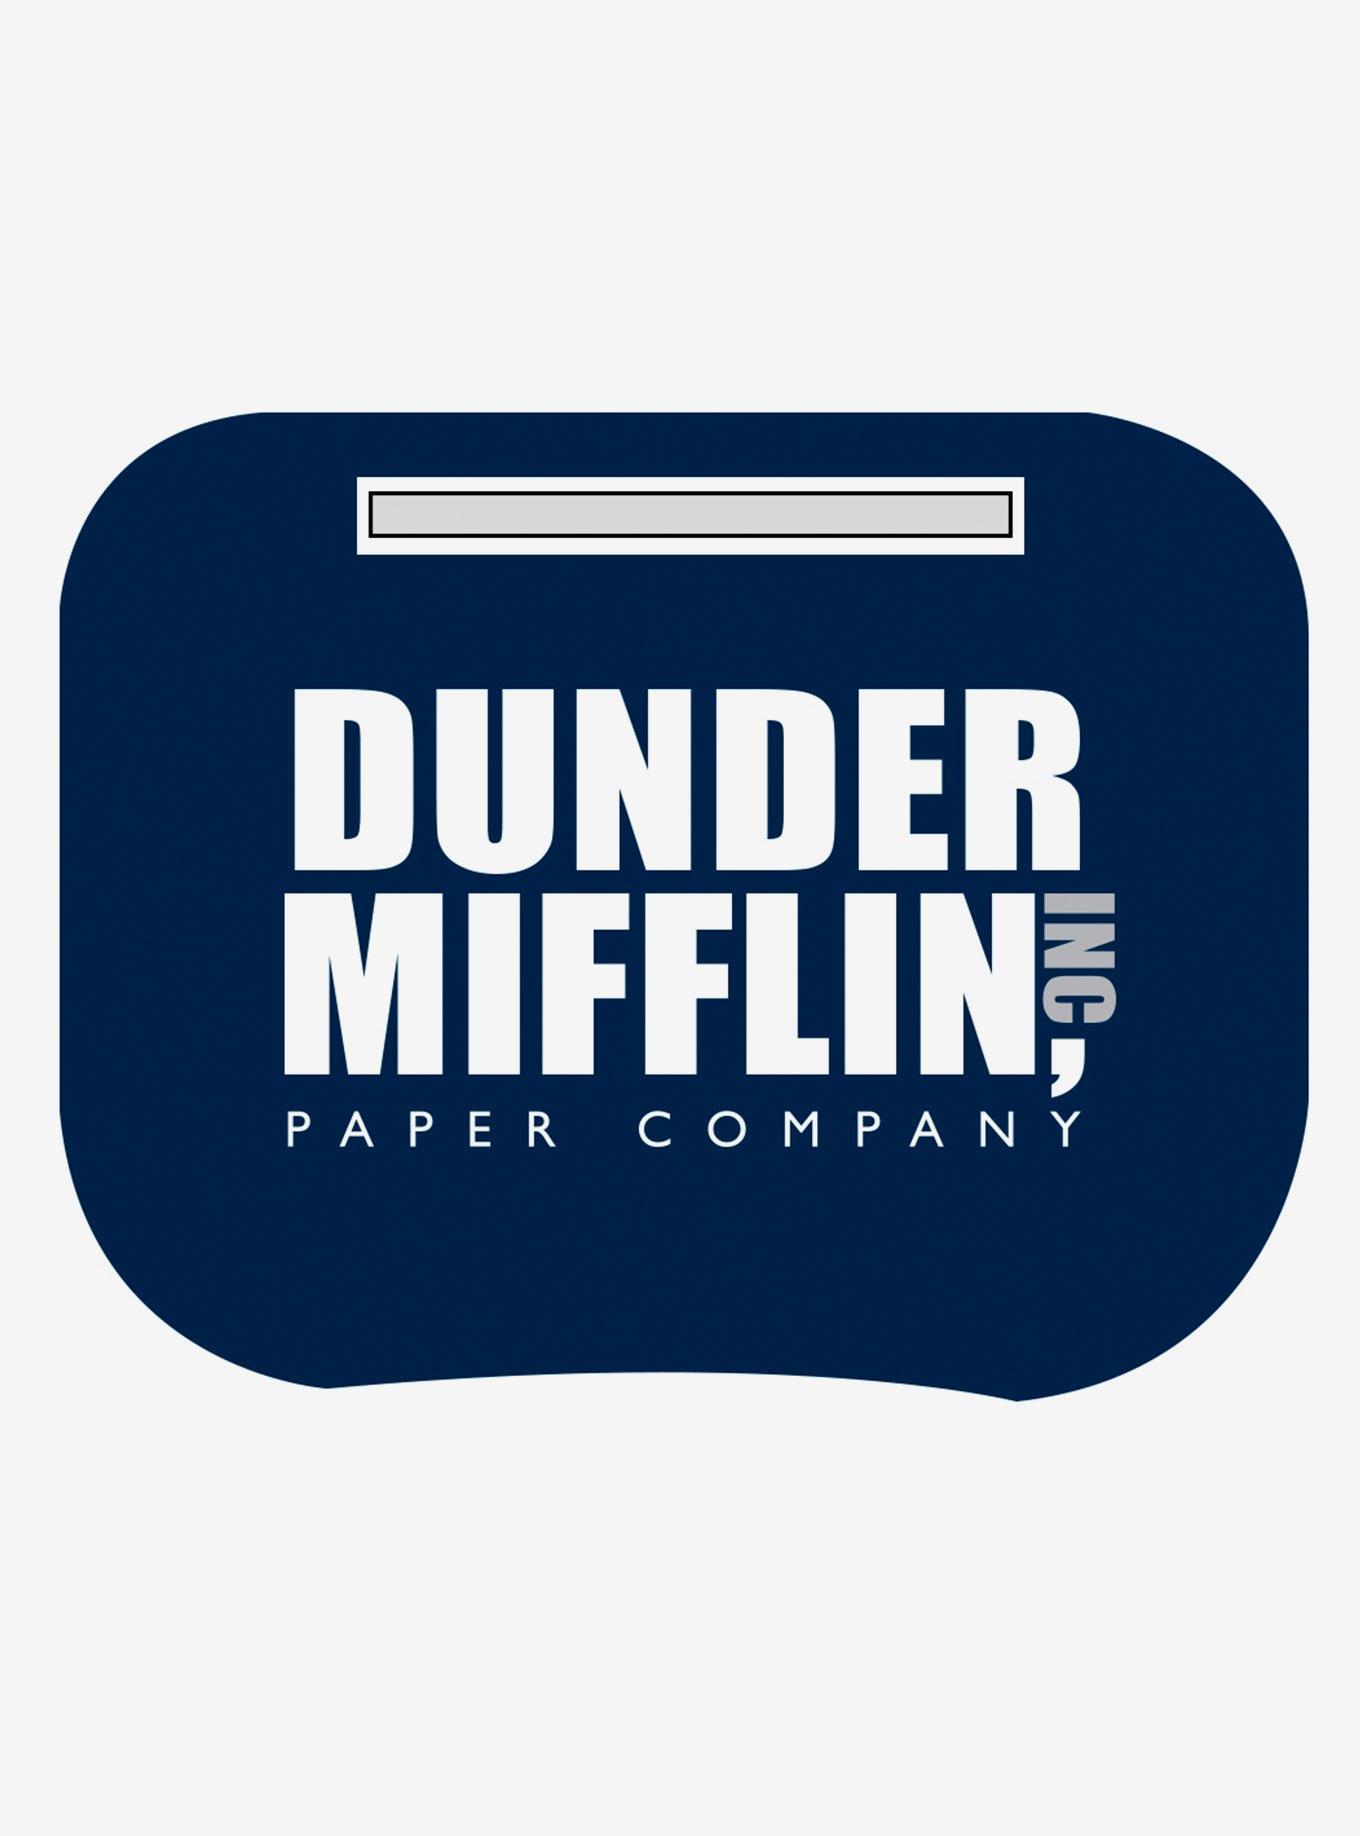 Loungefly The Office Dunder Mifflin Paper Company Inc Faux Leather Wallet